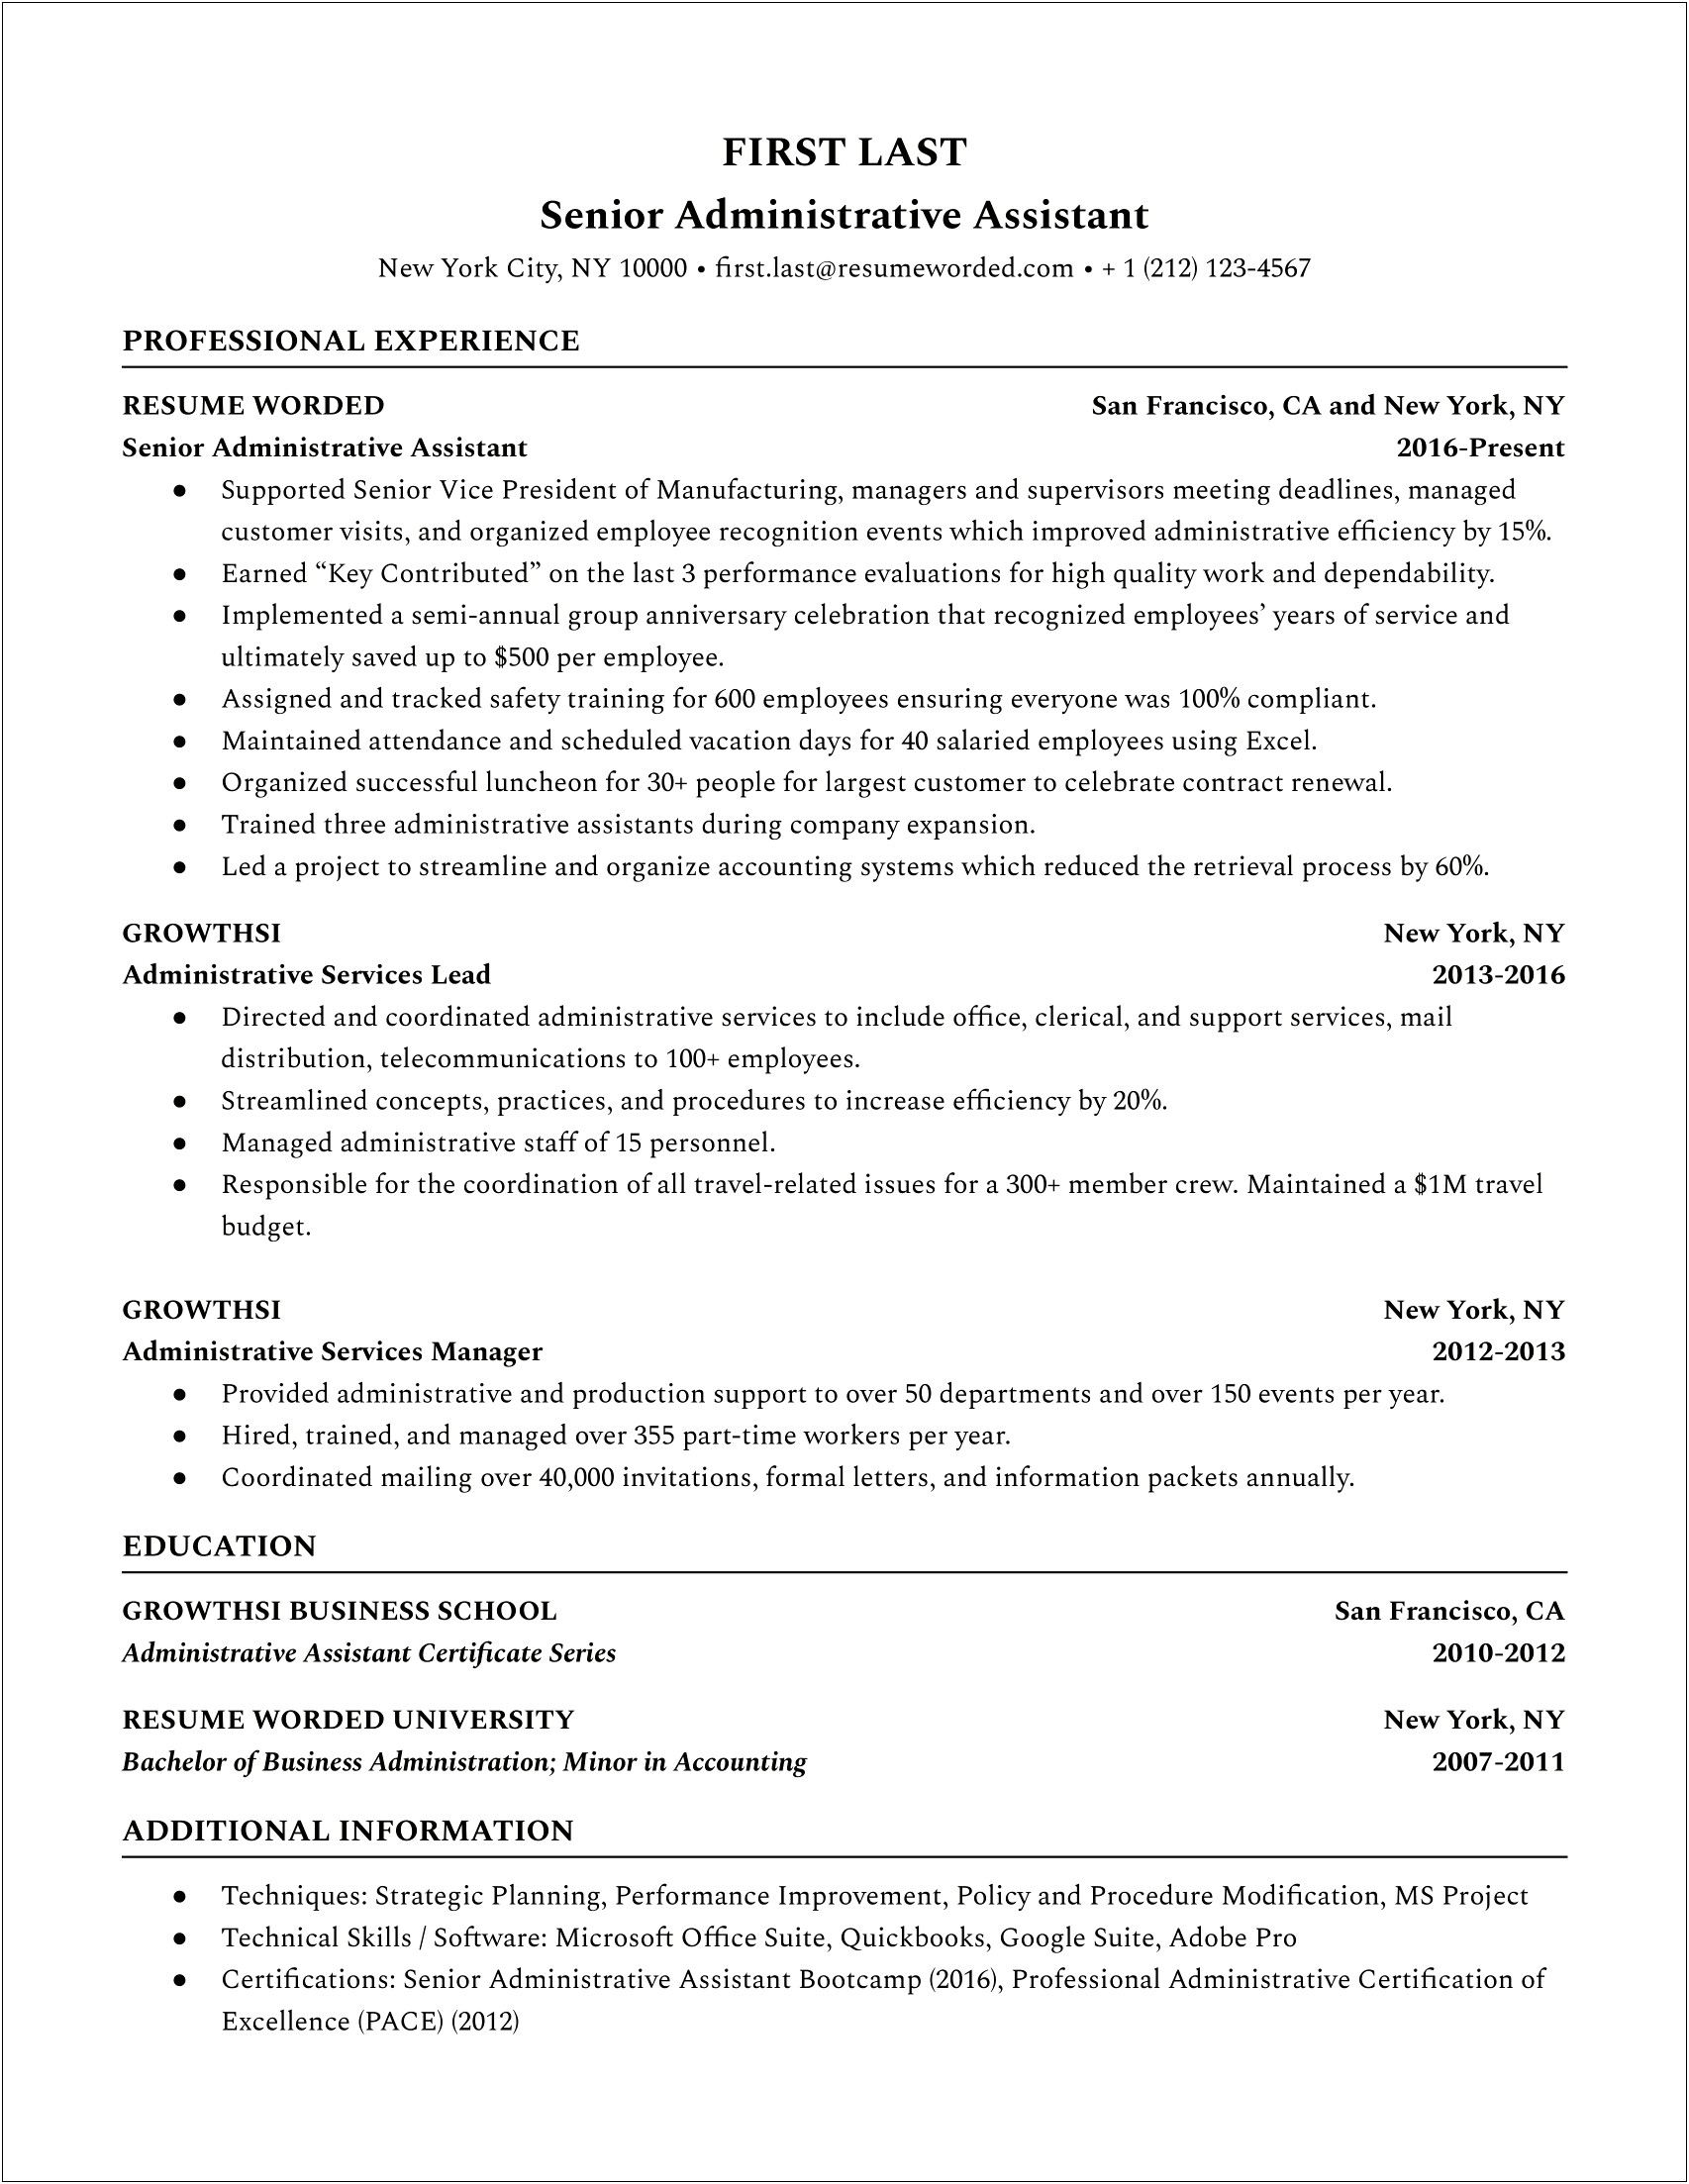 Work Ecpereince For Office Assistent For Resume